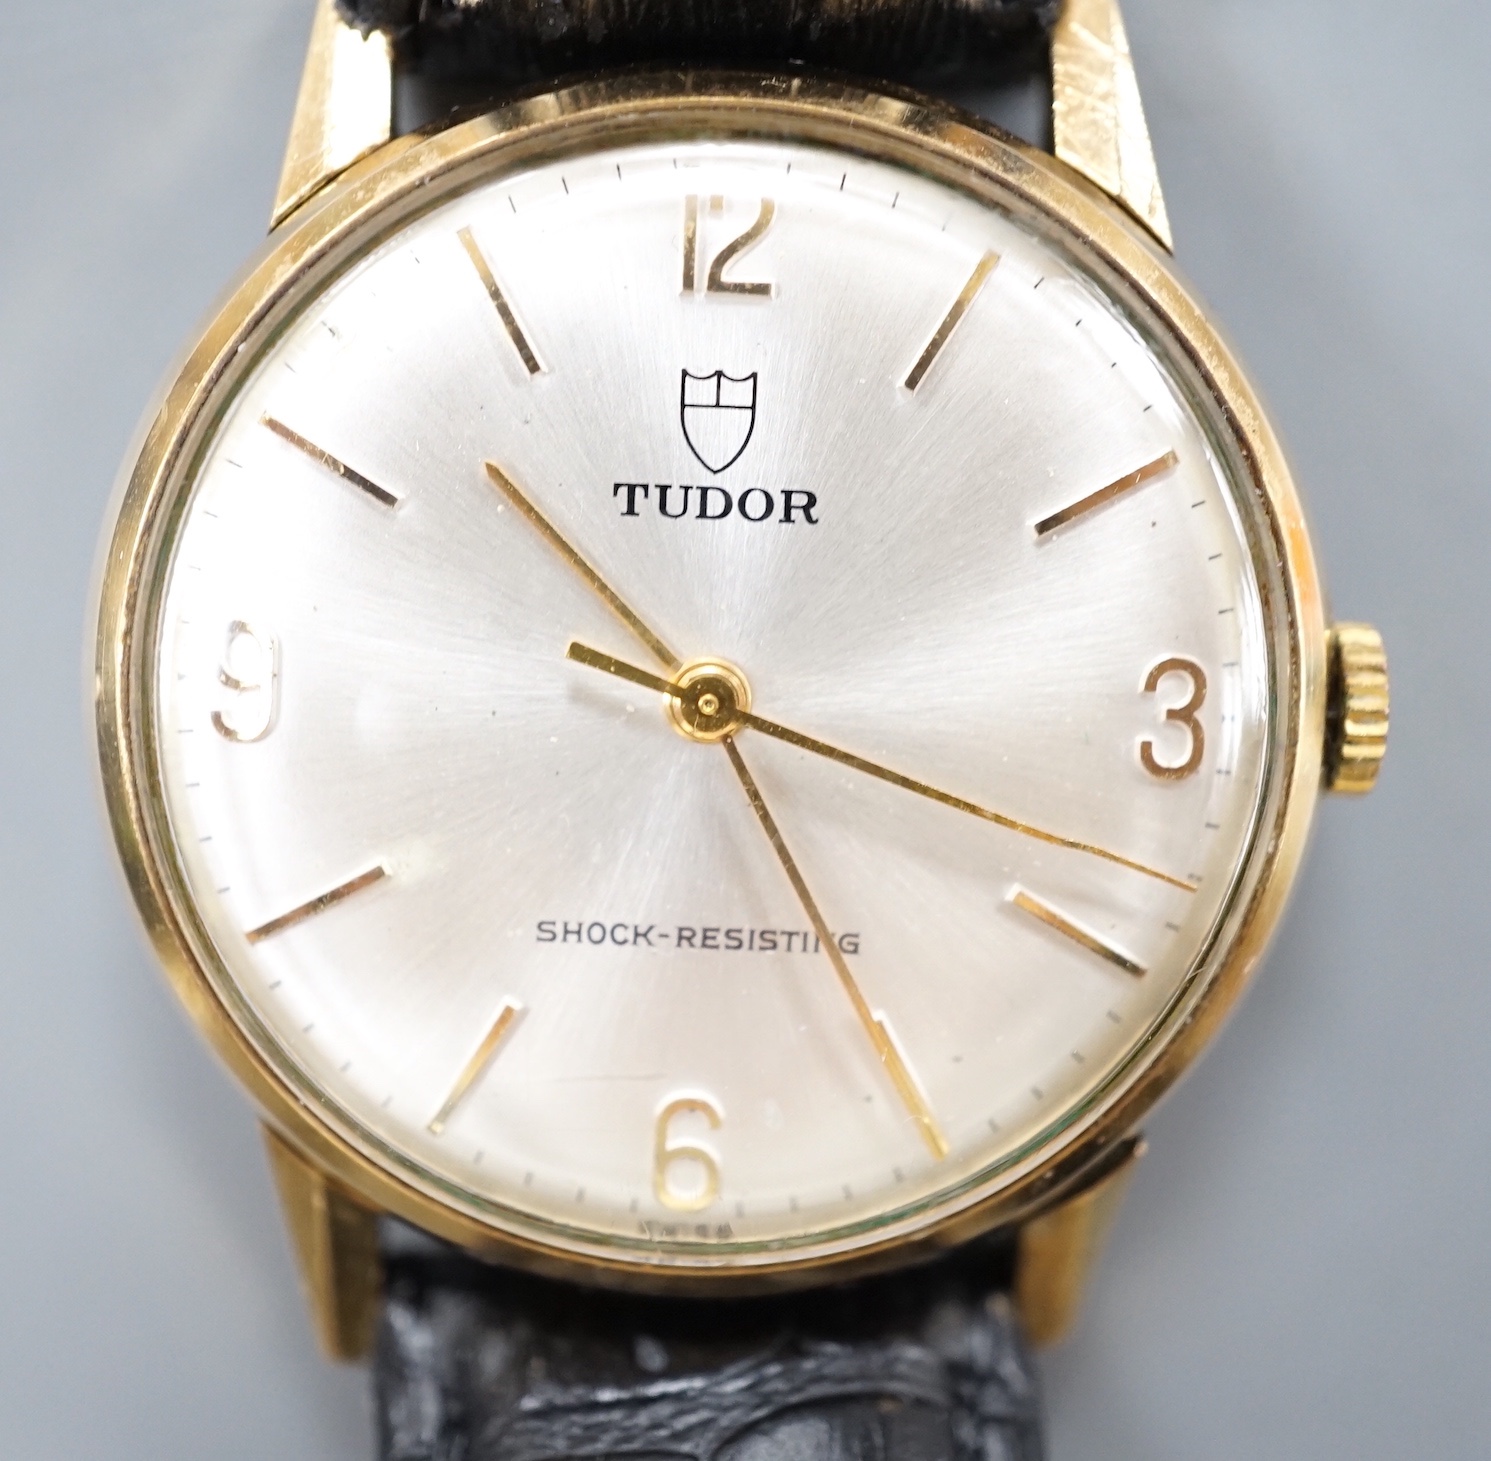 A gentleman's 1970's 9ct gold Tudor manual wind shock-resisting wrist watch, on a black leather strap, case diameter 33mm, with case back inscription